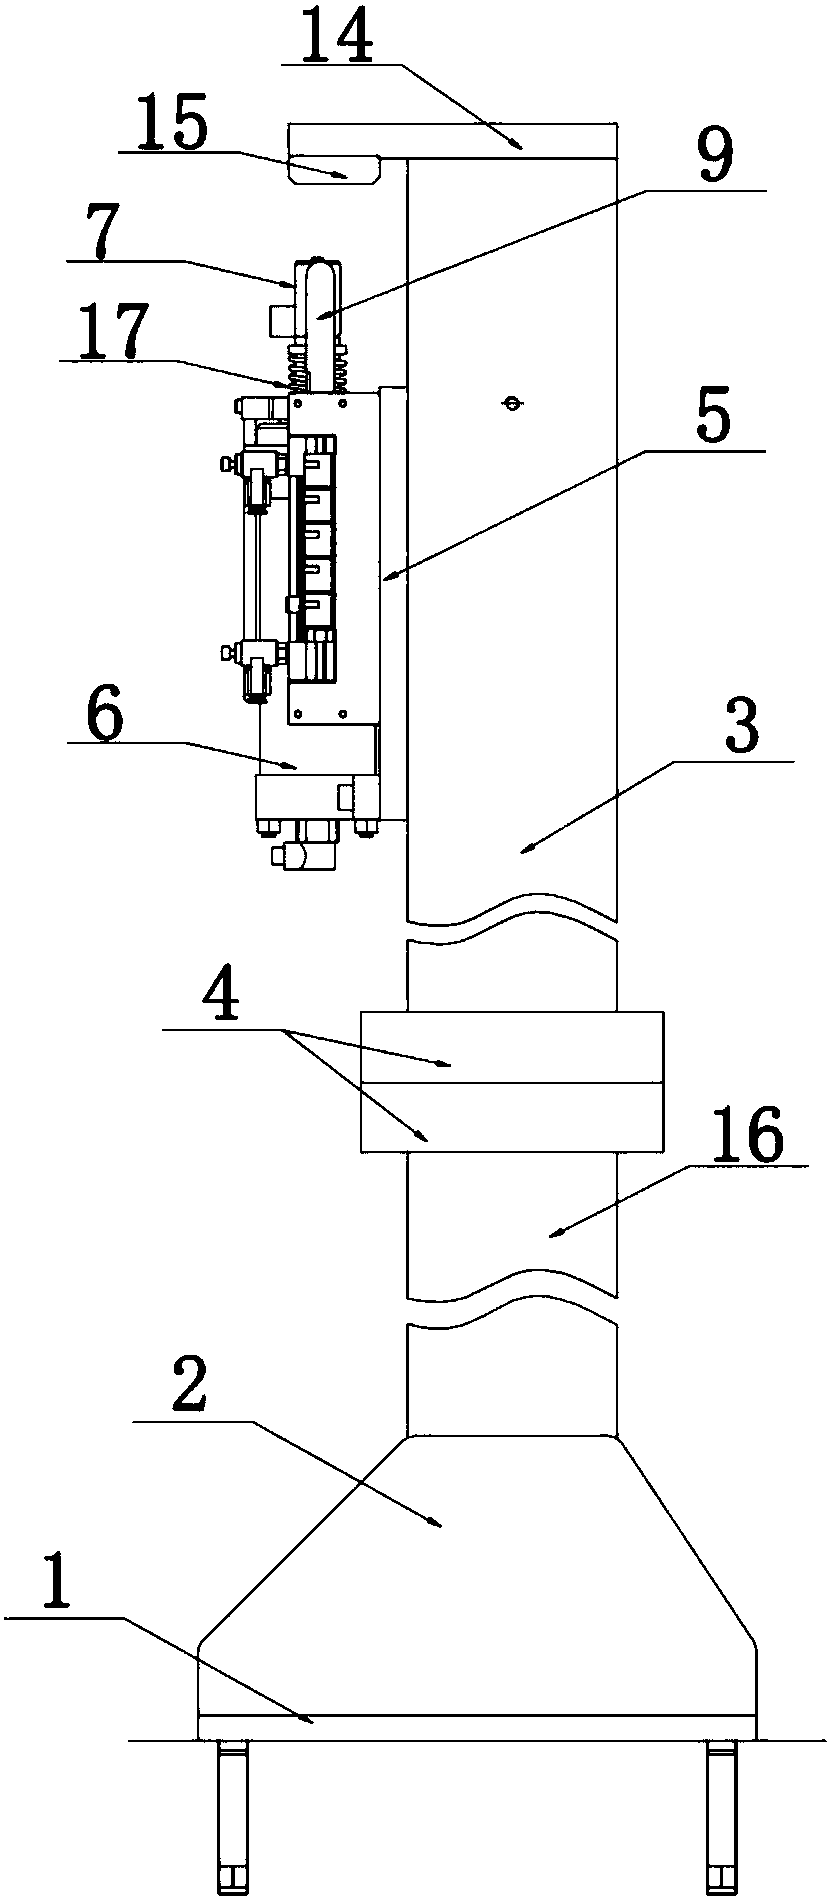 Reverse marking device for box-type furnace production line